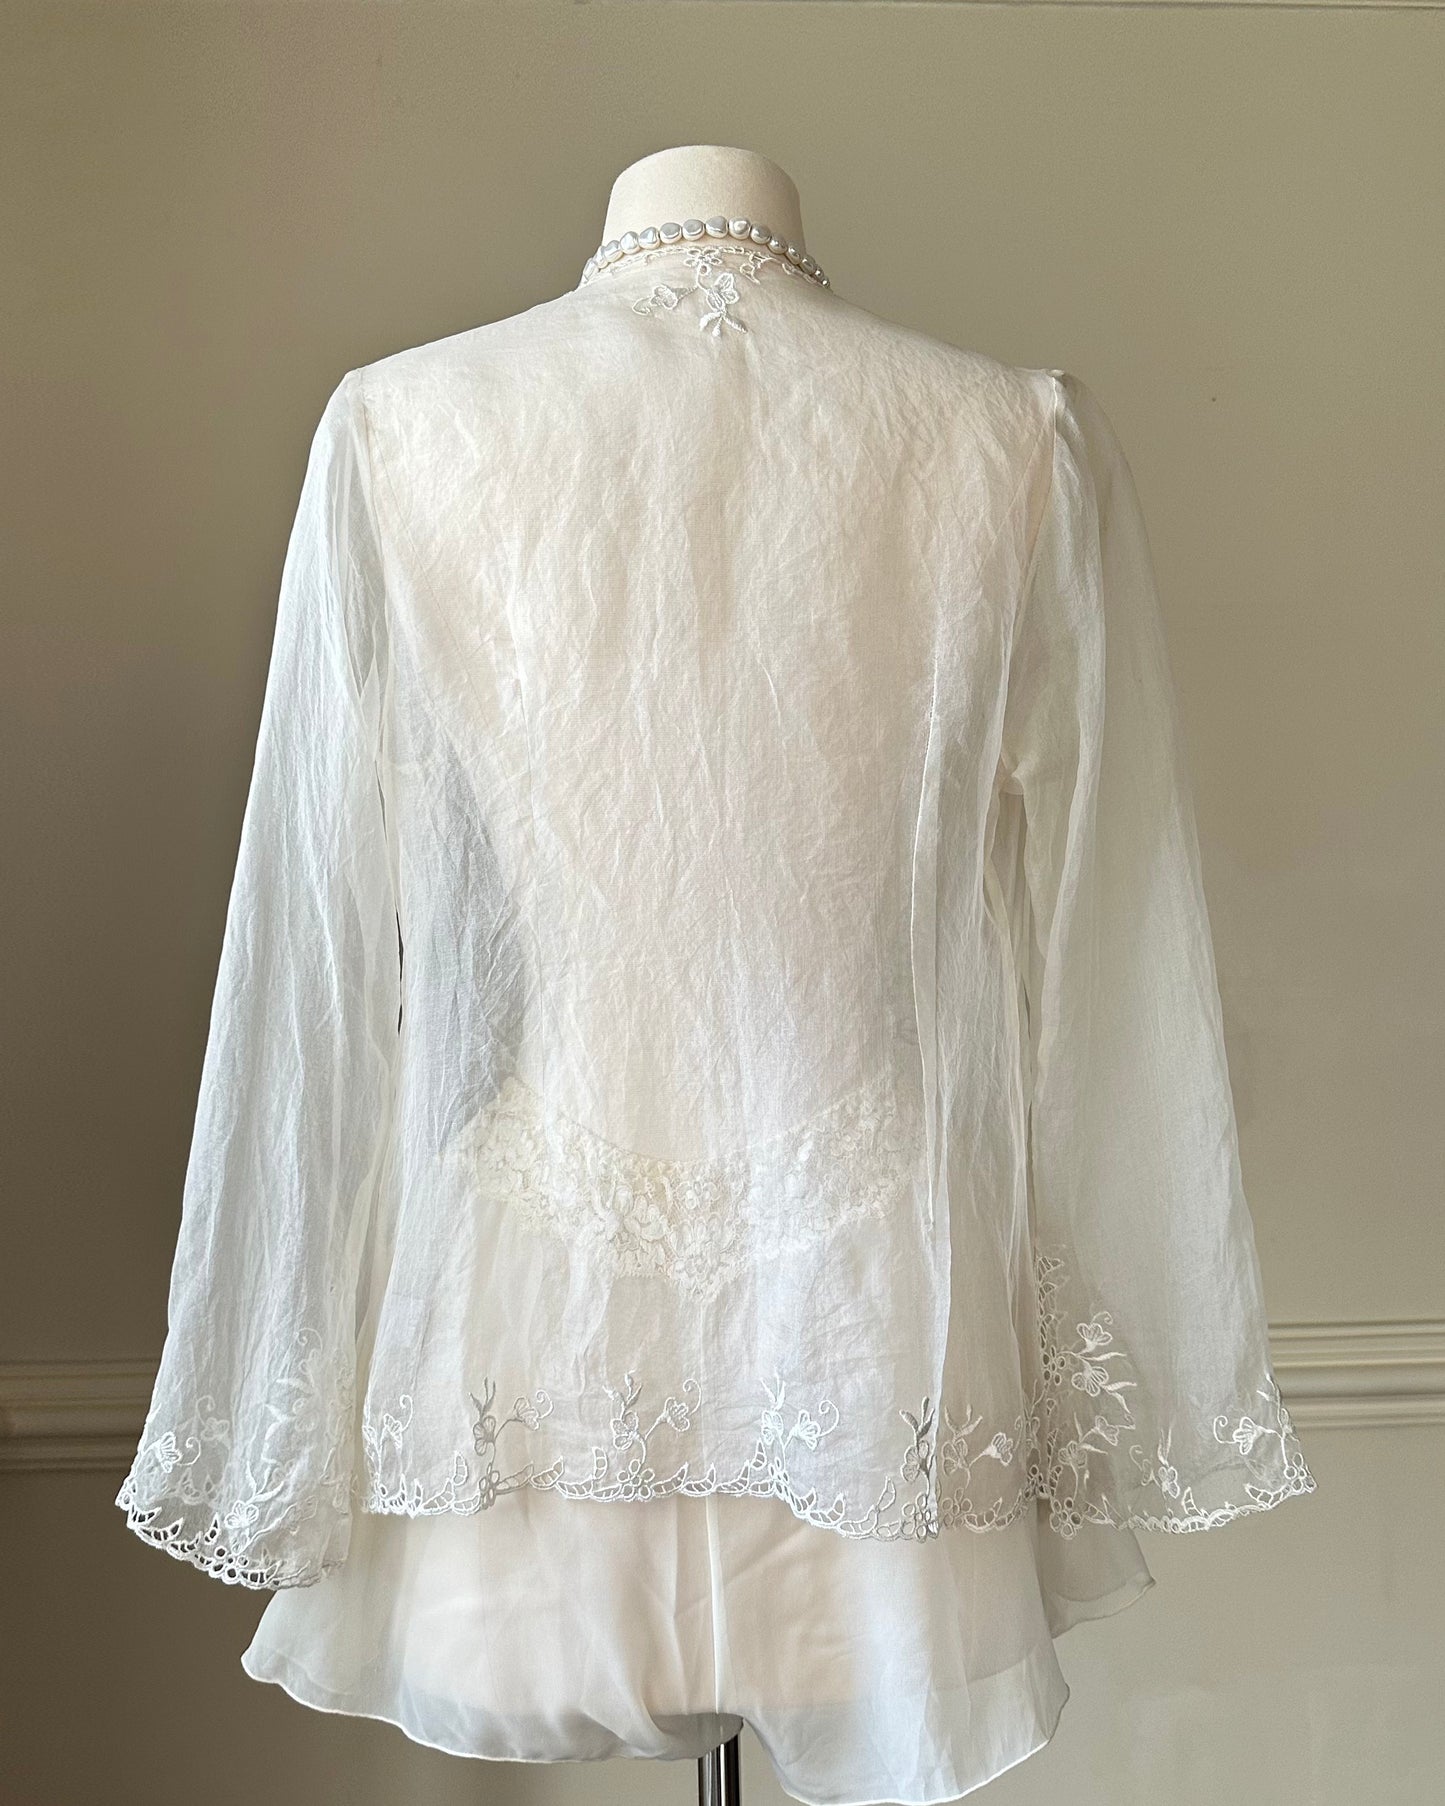 Elegant Sheer Long Sleeves Blouse featuring Floral Embroidery